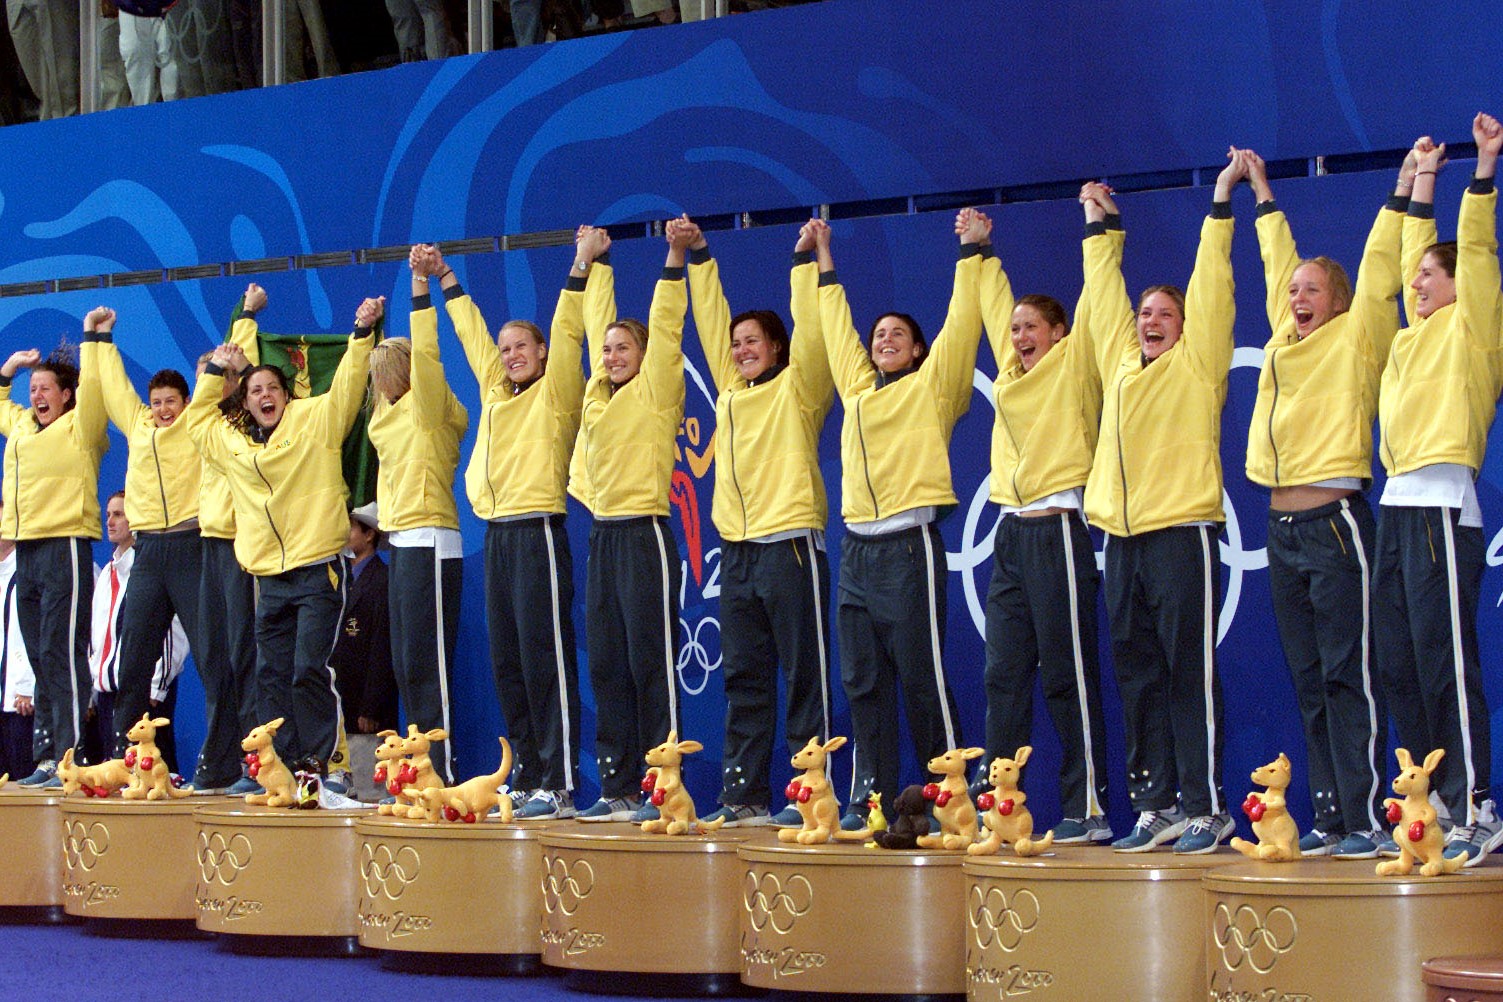 The Australian Women's Water Polo team celebrating their gold medal win at the Sydney 2000 Olympic Games.